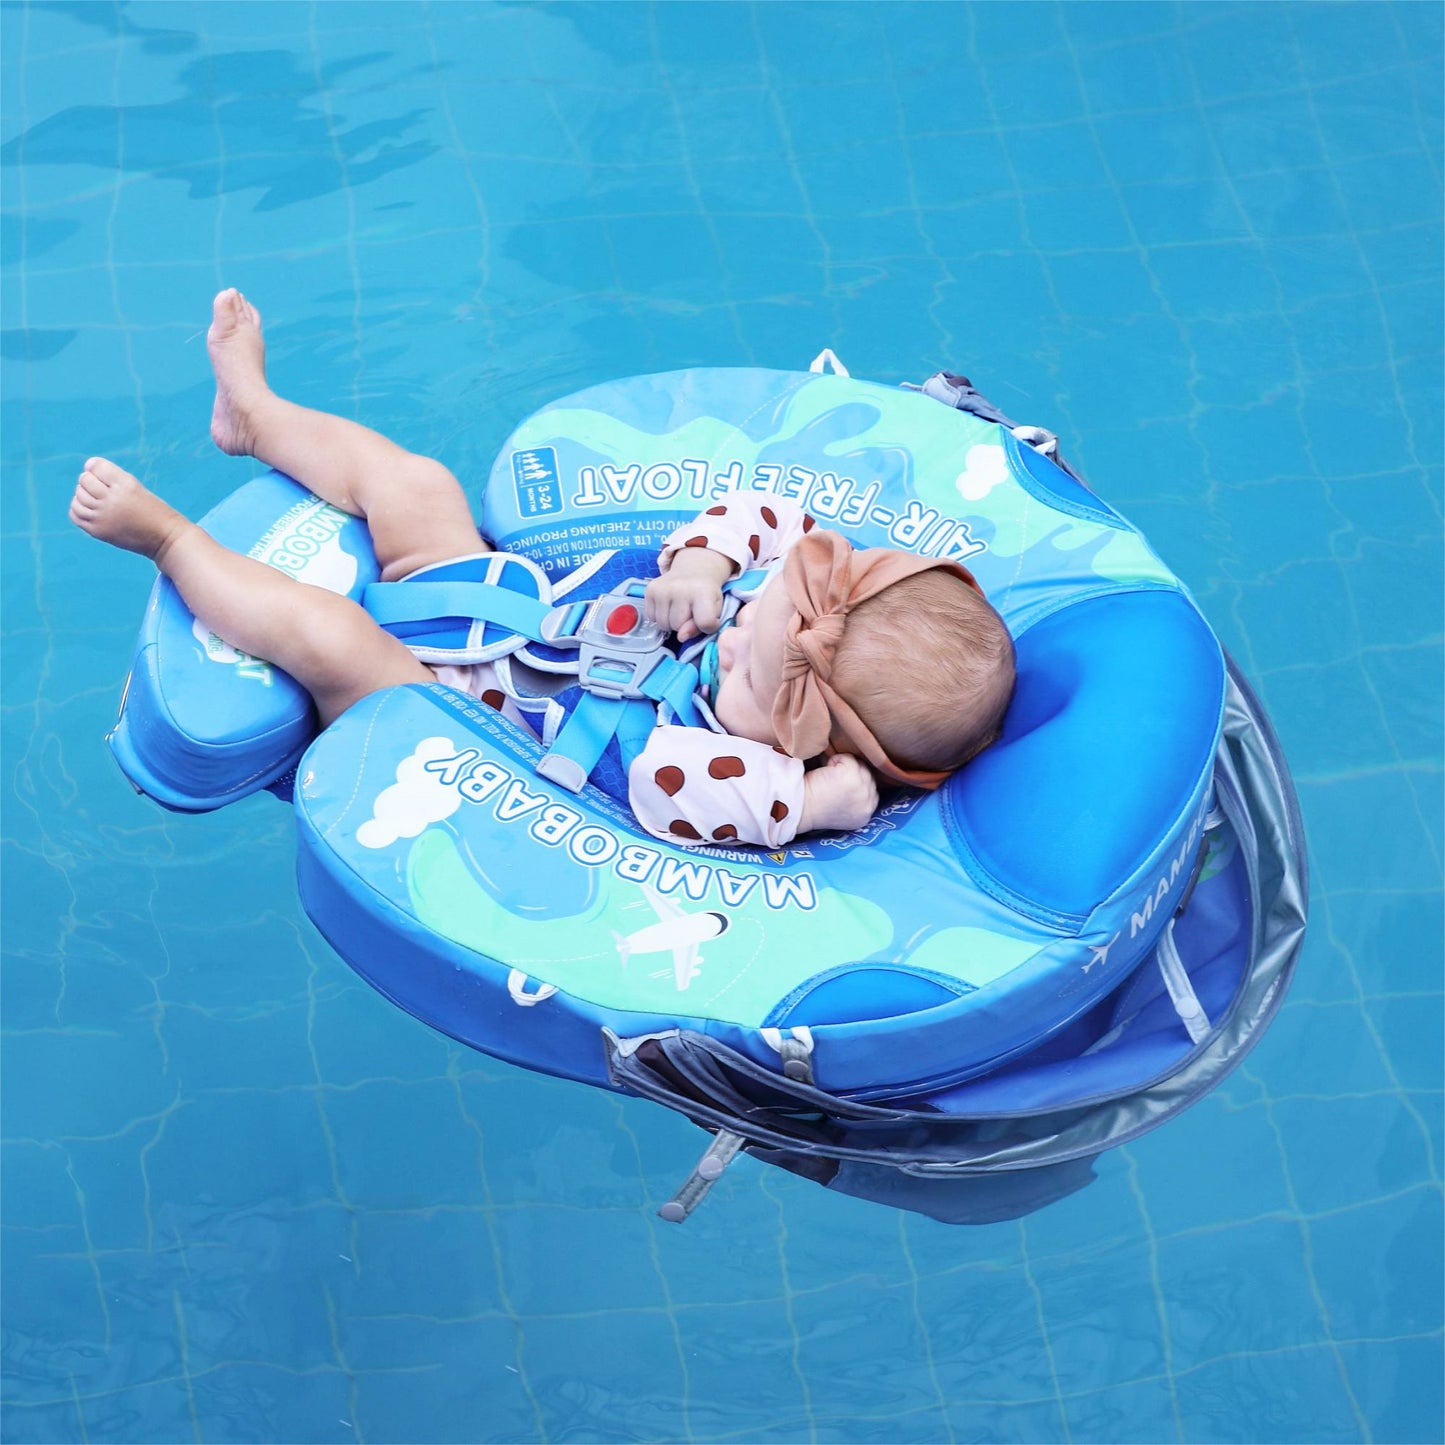 Mambobaby Swim Float with Canopy Earth